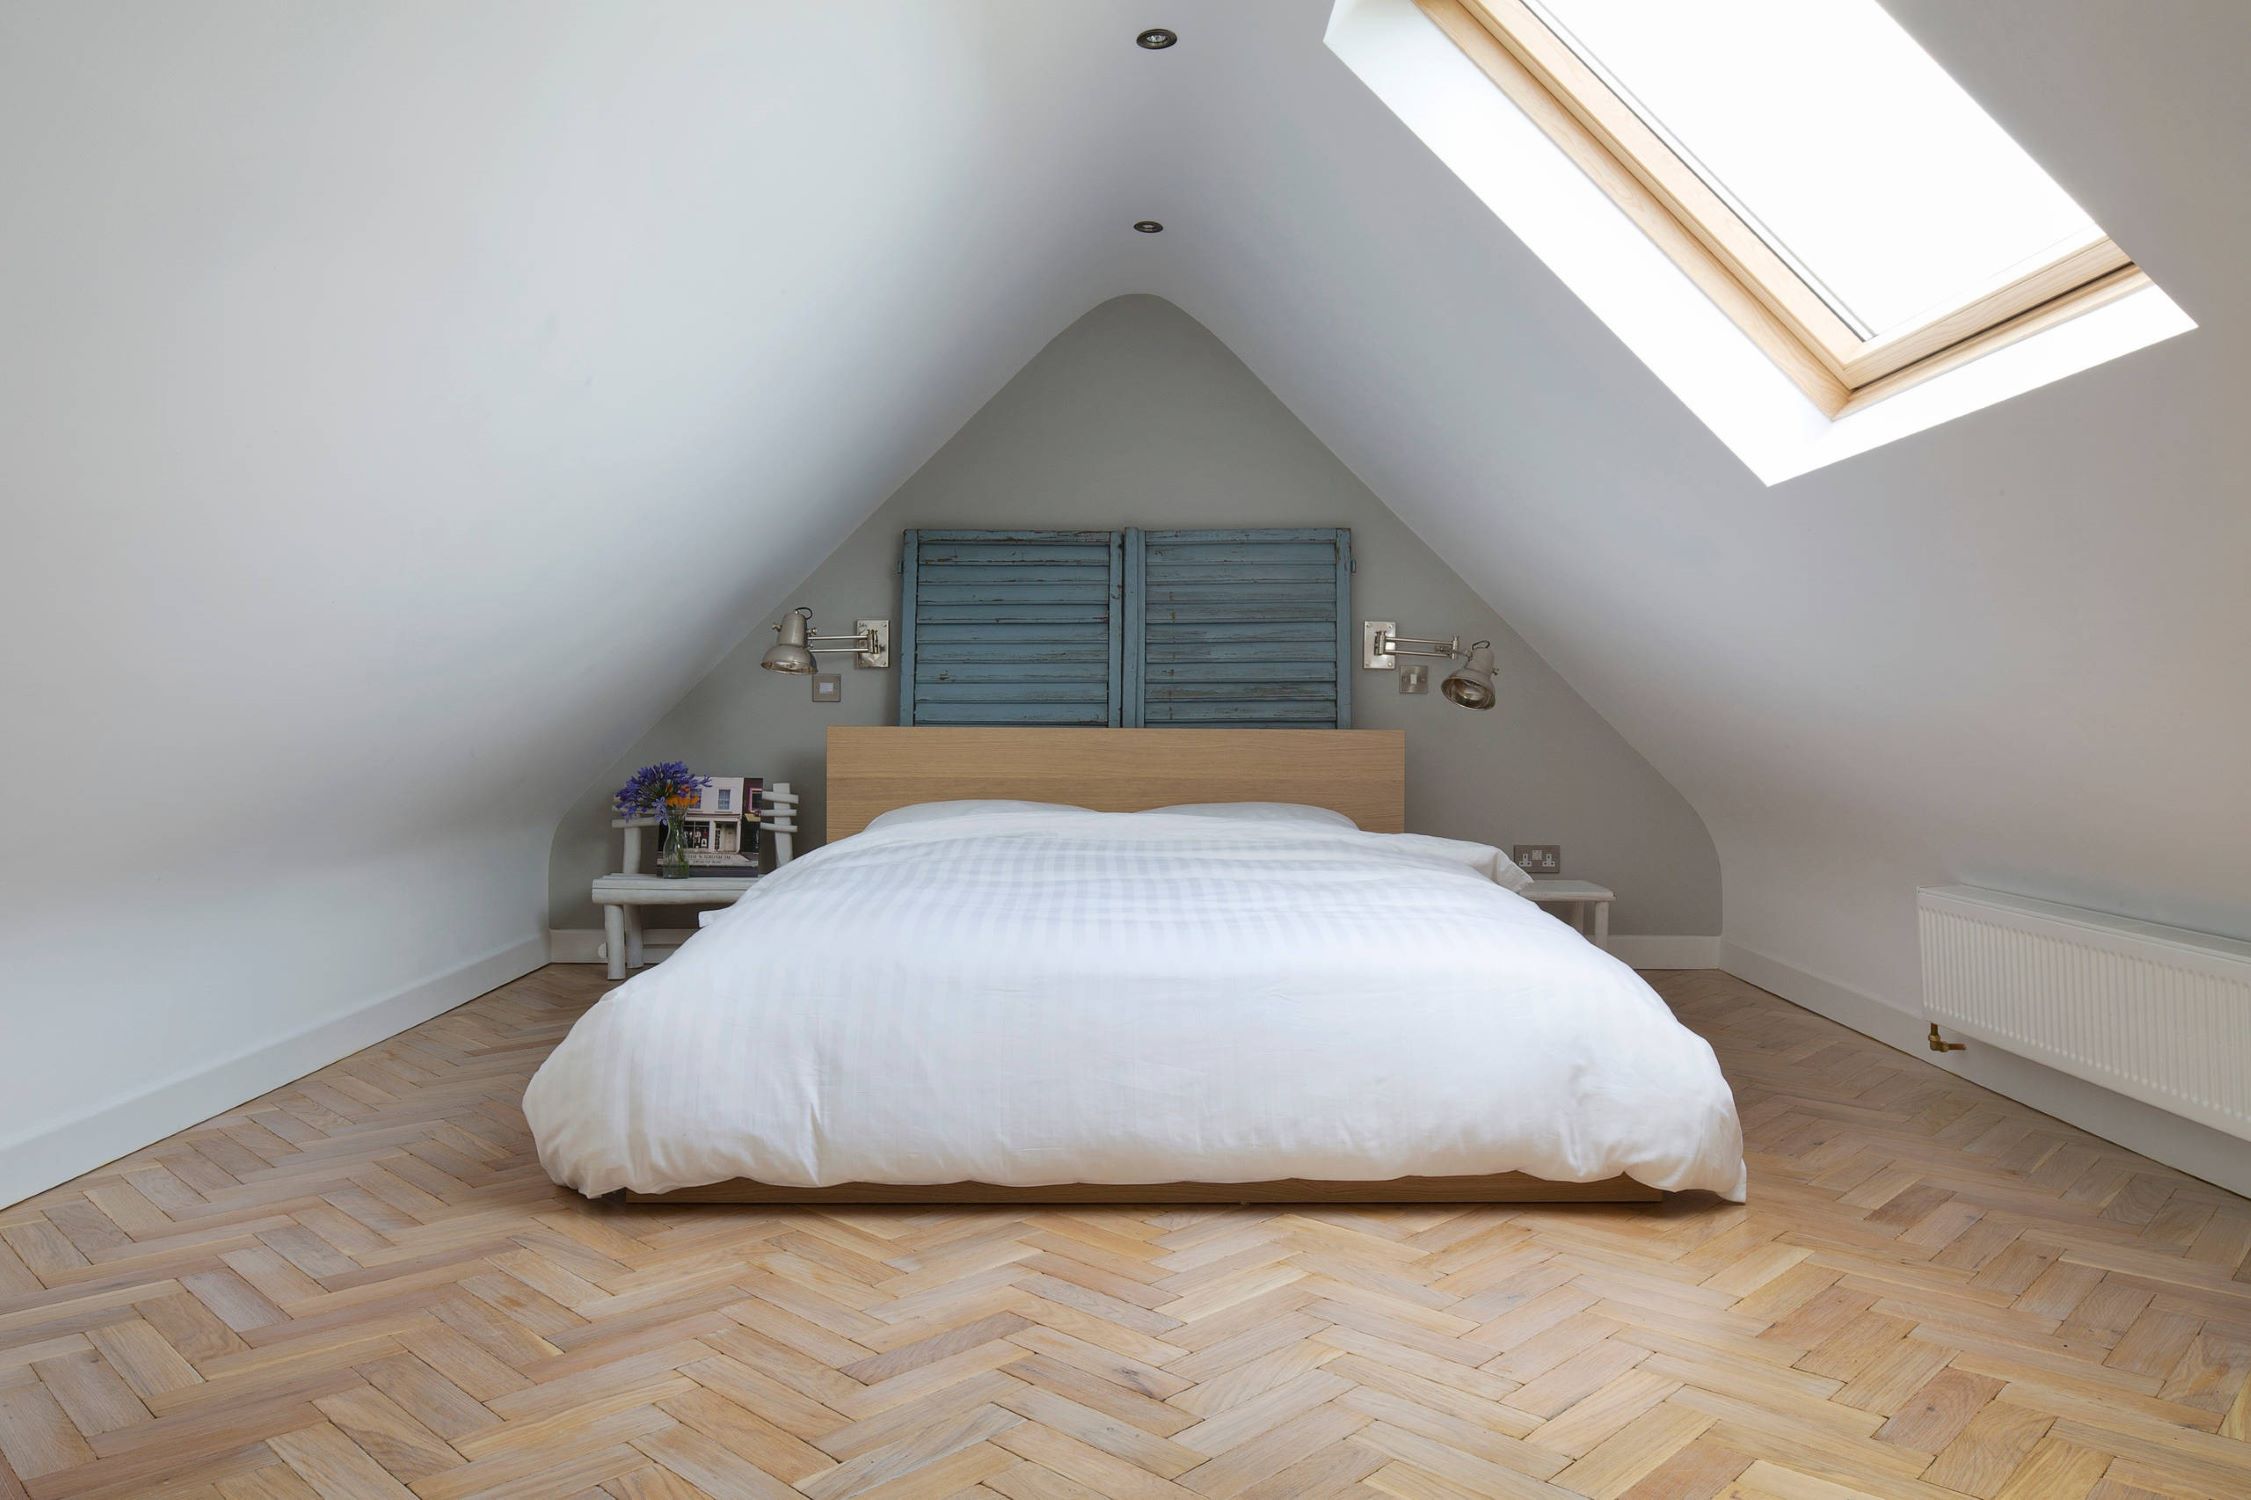 How to Transform a Low Ceiling Small Attic Room - DIY Ideas